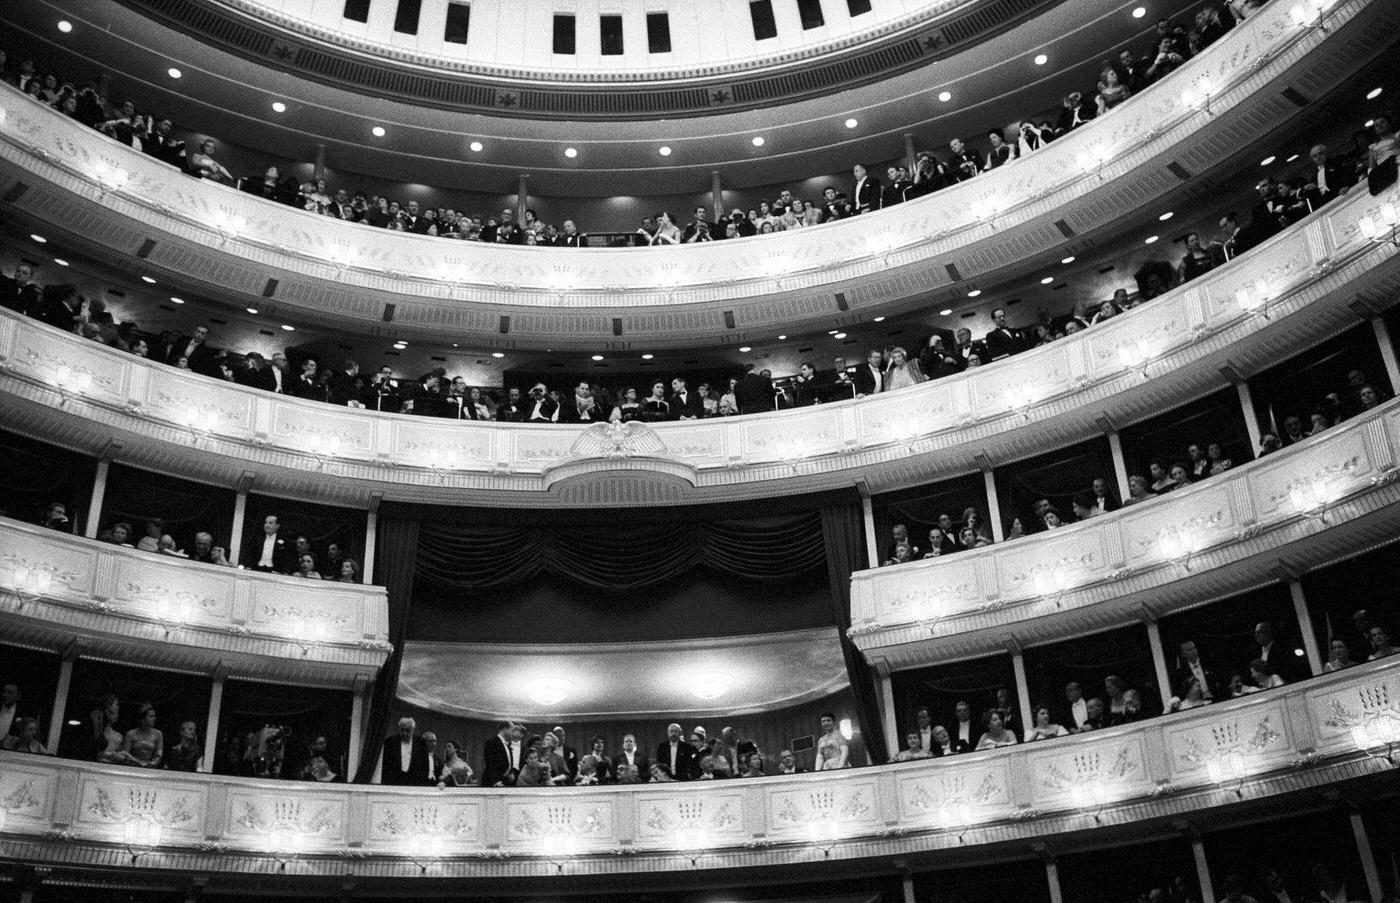 A crowd of elegant people attending the reopening of the Vienna State Opera from the gallery of the theatre in November 1955.